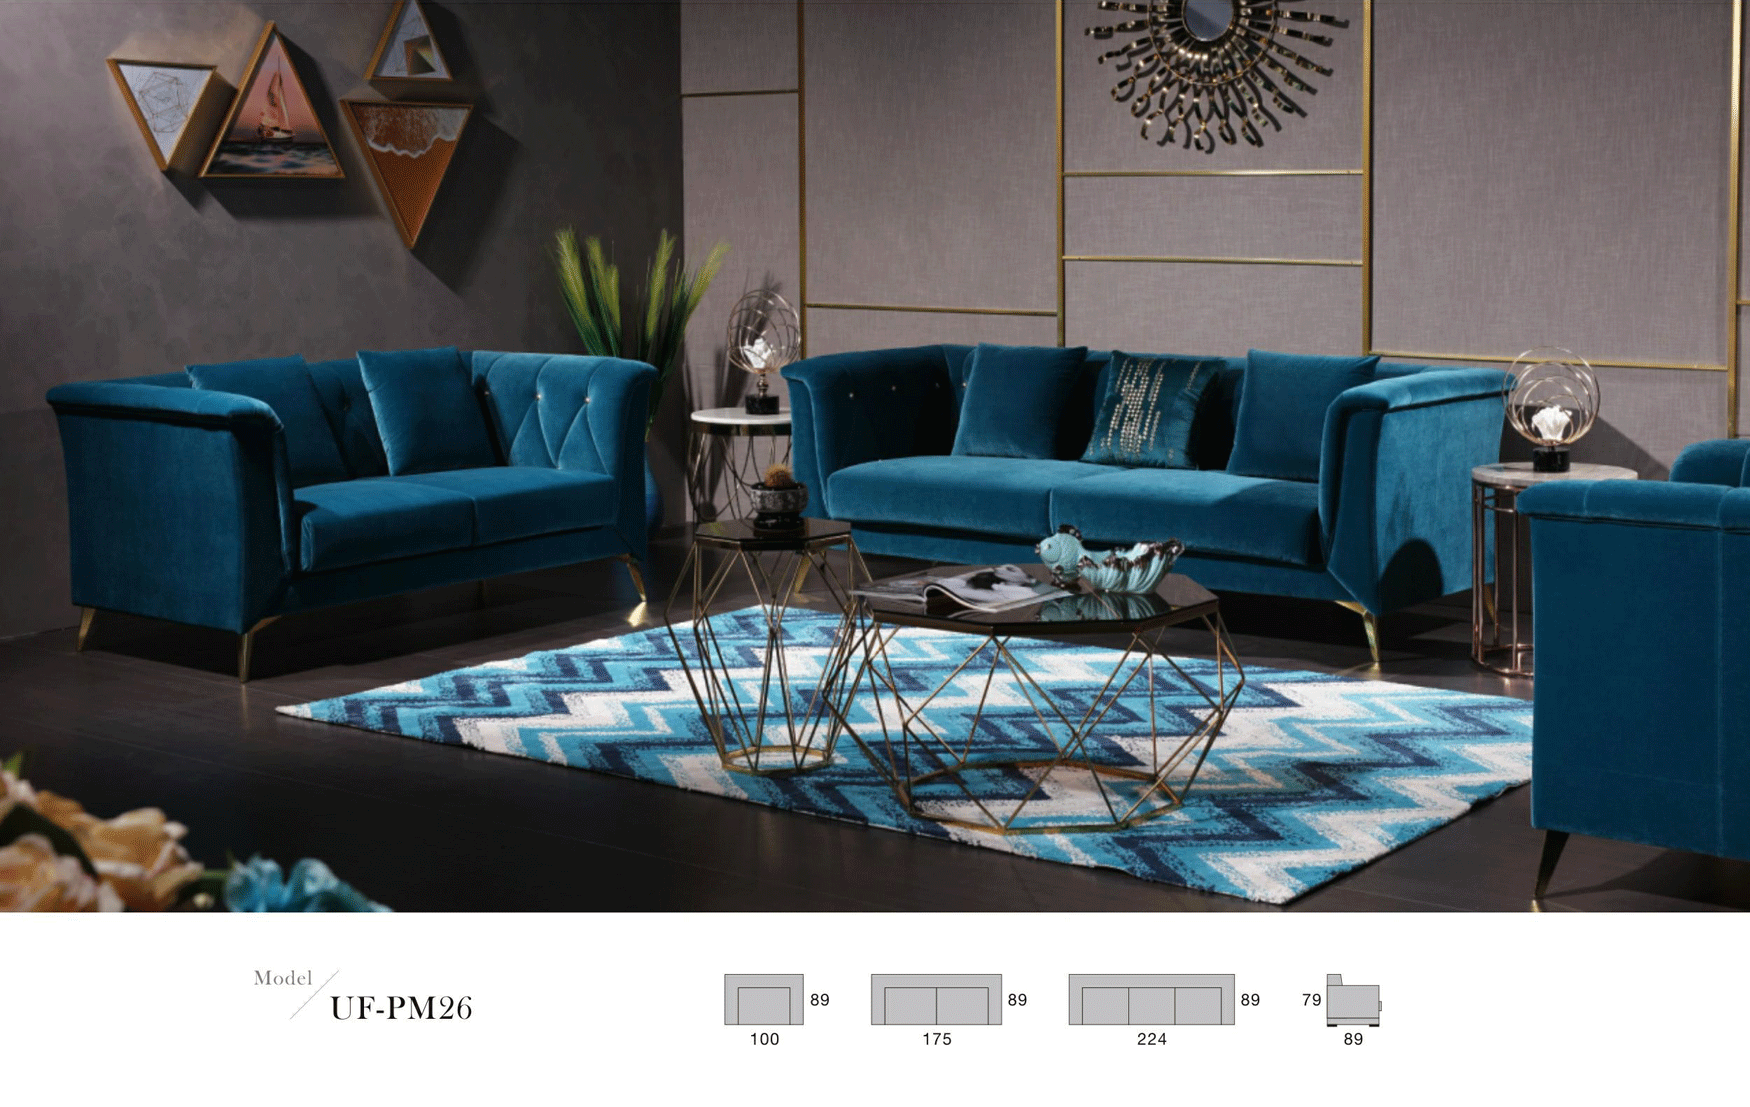 Living Room Furniture Sleepers Sofas Loveseats and Chairs PM26 LIVING ROOM SET FABRIC